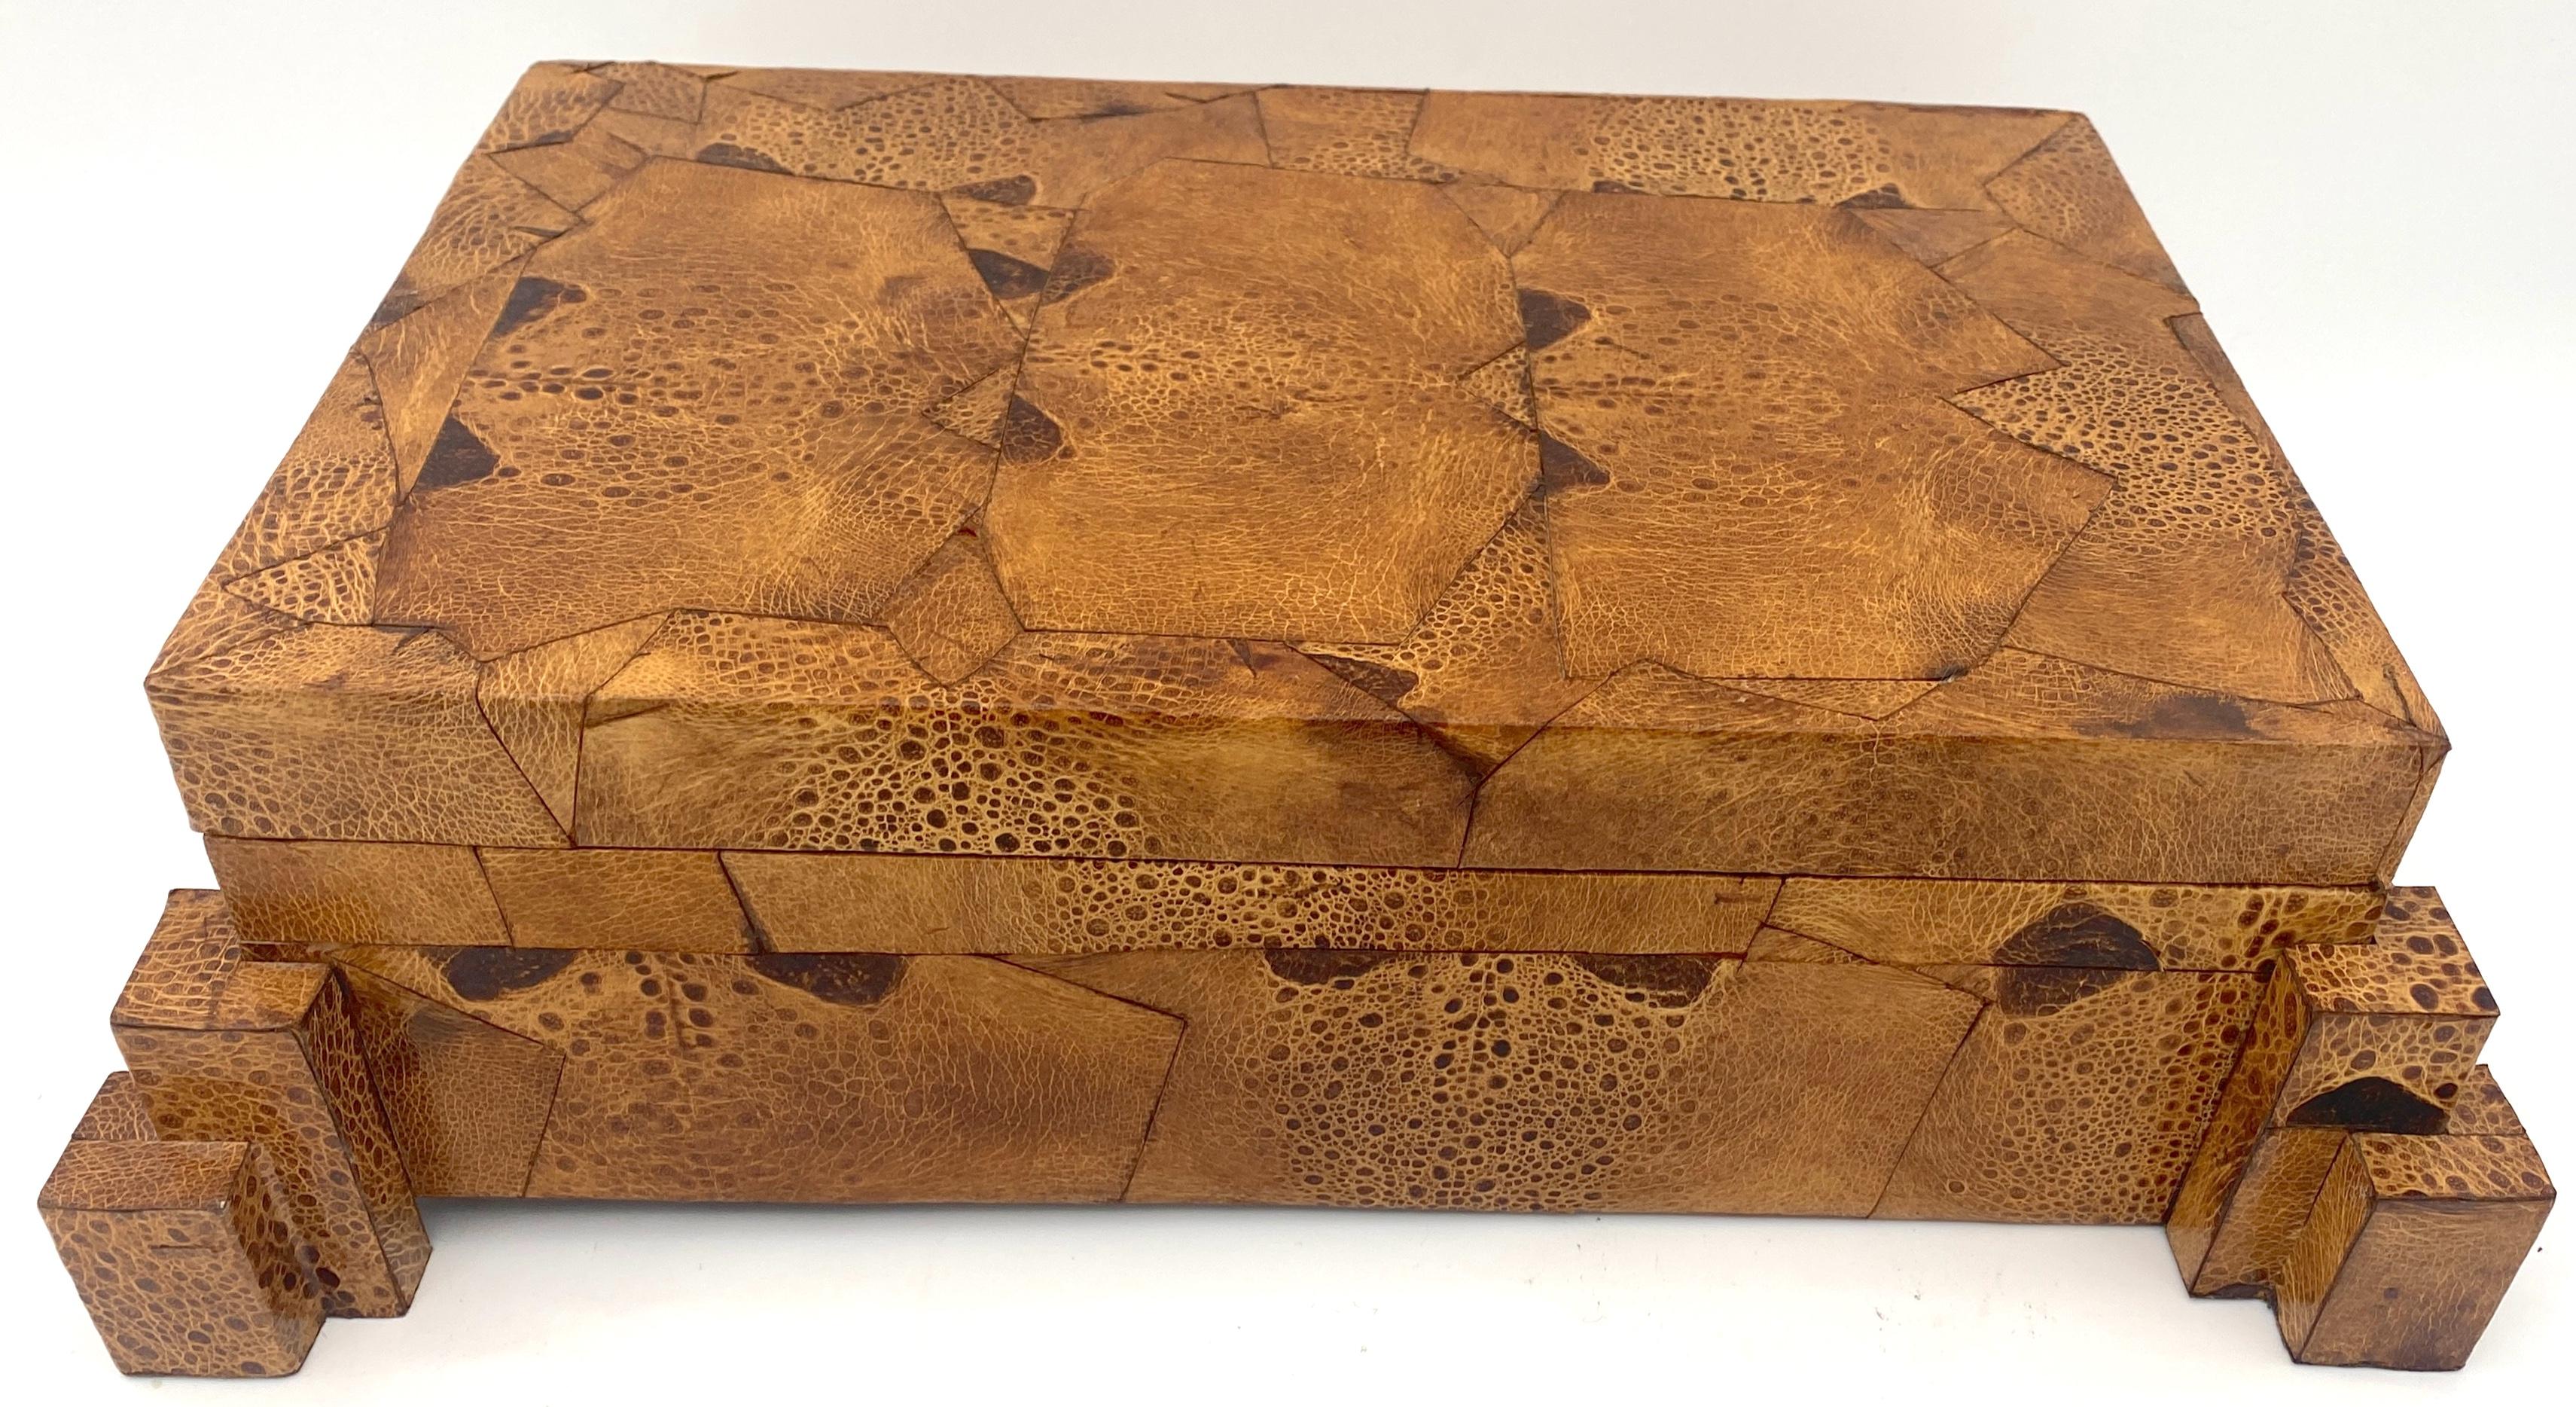 Exotic 1970s Frog Skin-Leather Asymmetrical Table Box, Style of Karl Springer 

A unique box of exotic elegance with this 1970s Frog Skin-Leather Asymmetrical Table Box, in the style of Karl Springer. This piece is a true tour de force, showcasing a